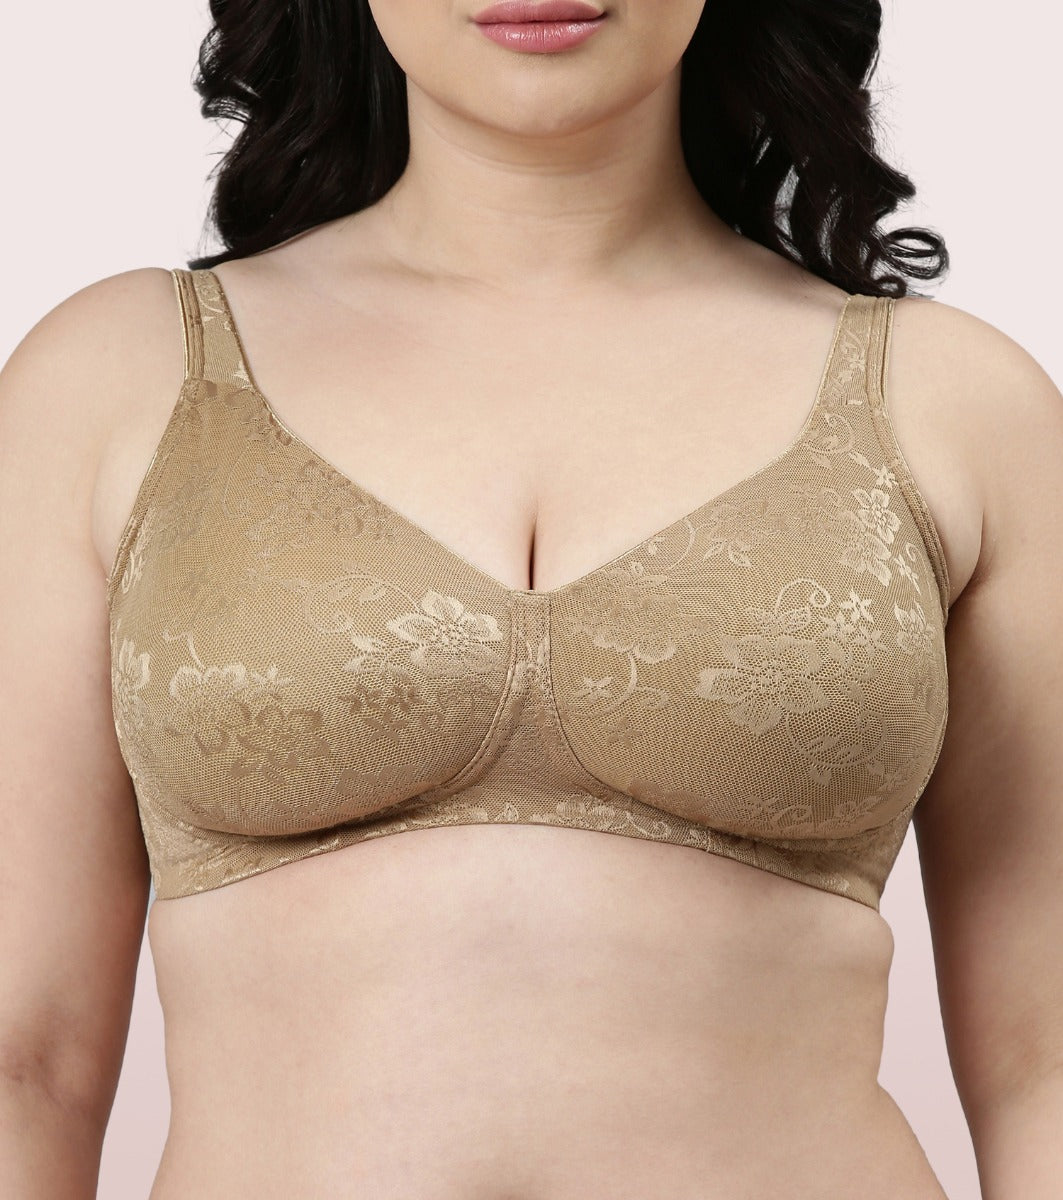 Buy Enamor F135 Full Support Lace Bra at